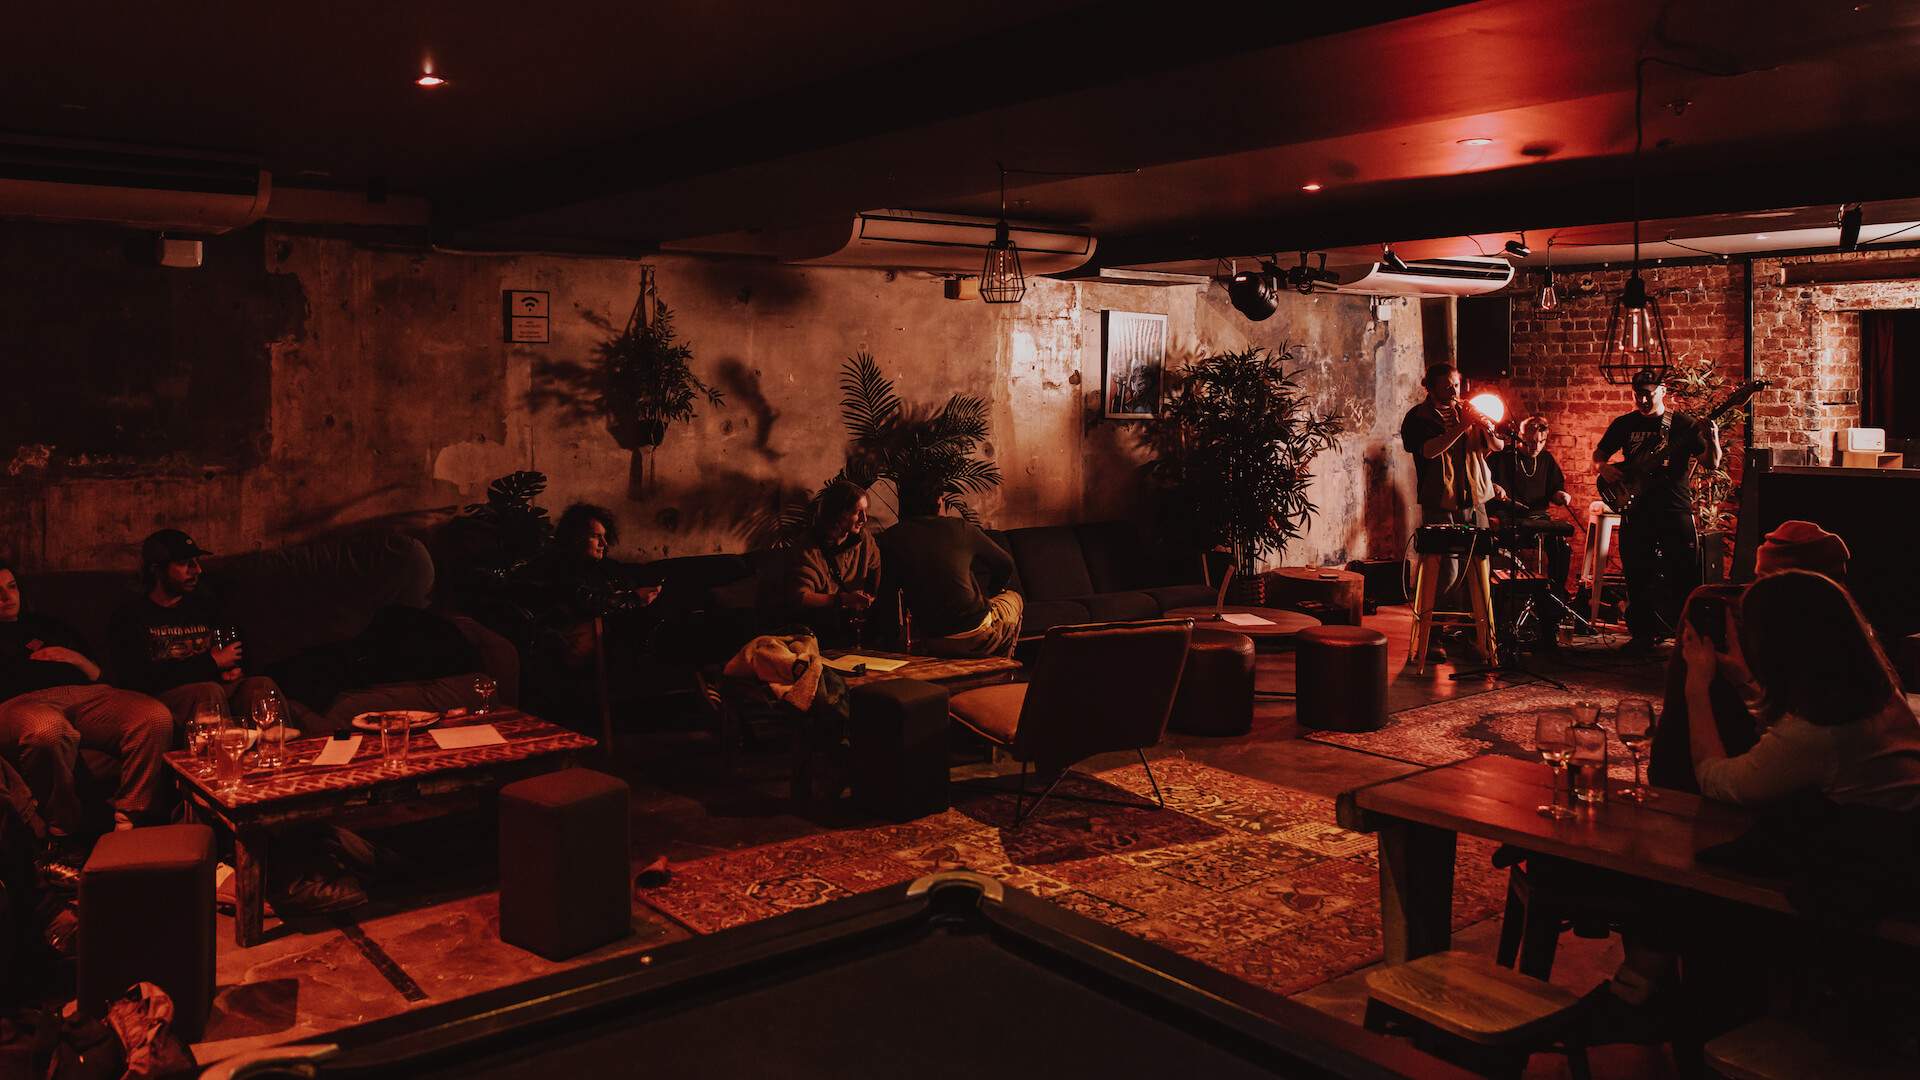 Now Open: Melbourne Just Scored a New Underground Live Music Venue and Bar in the CBD